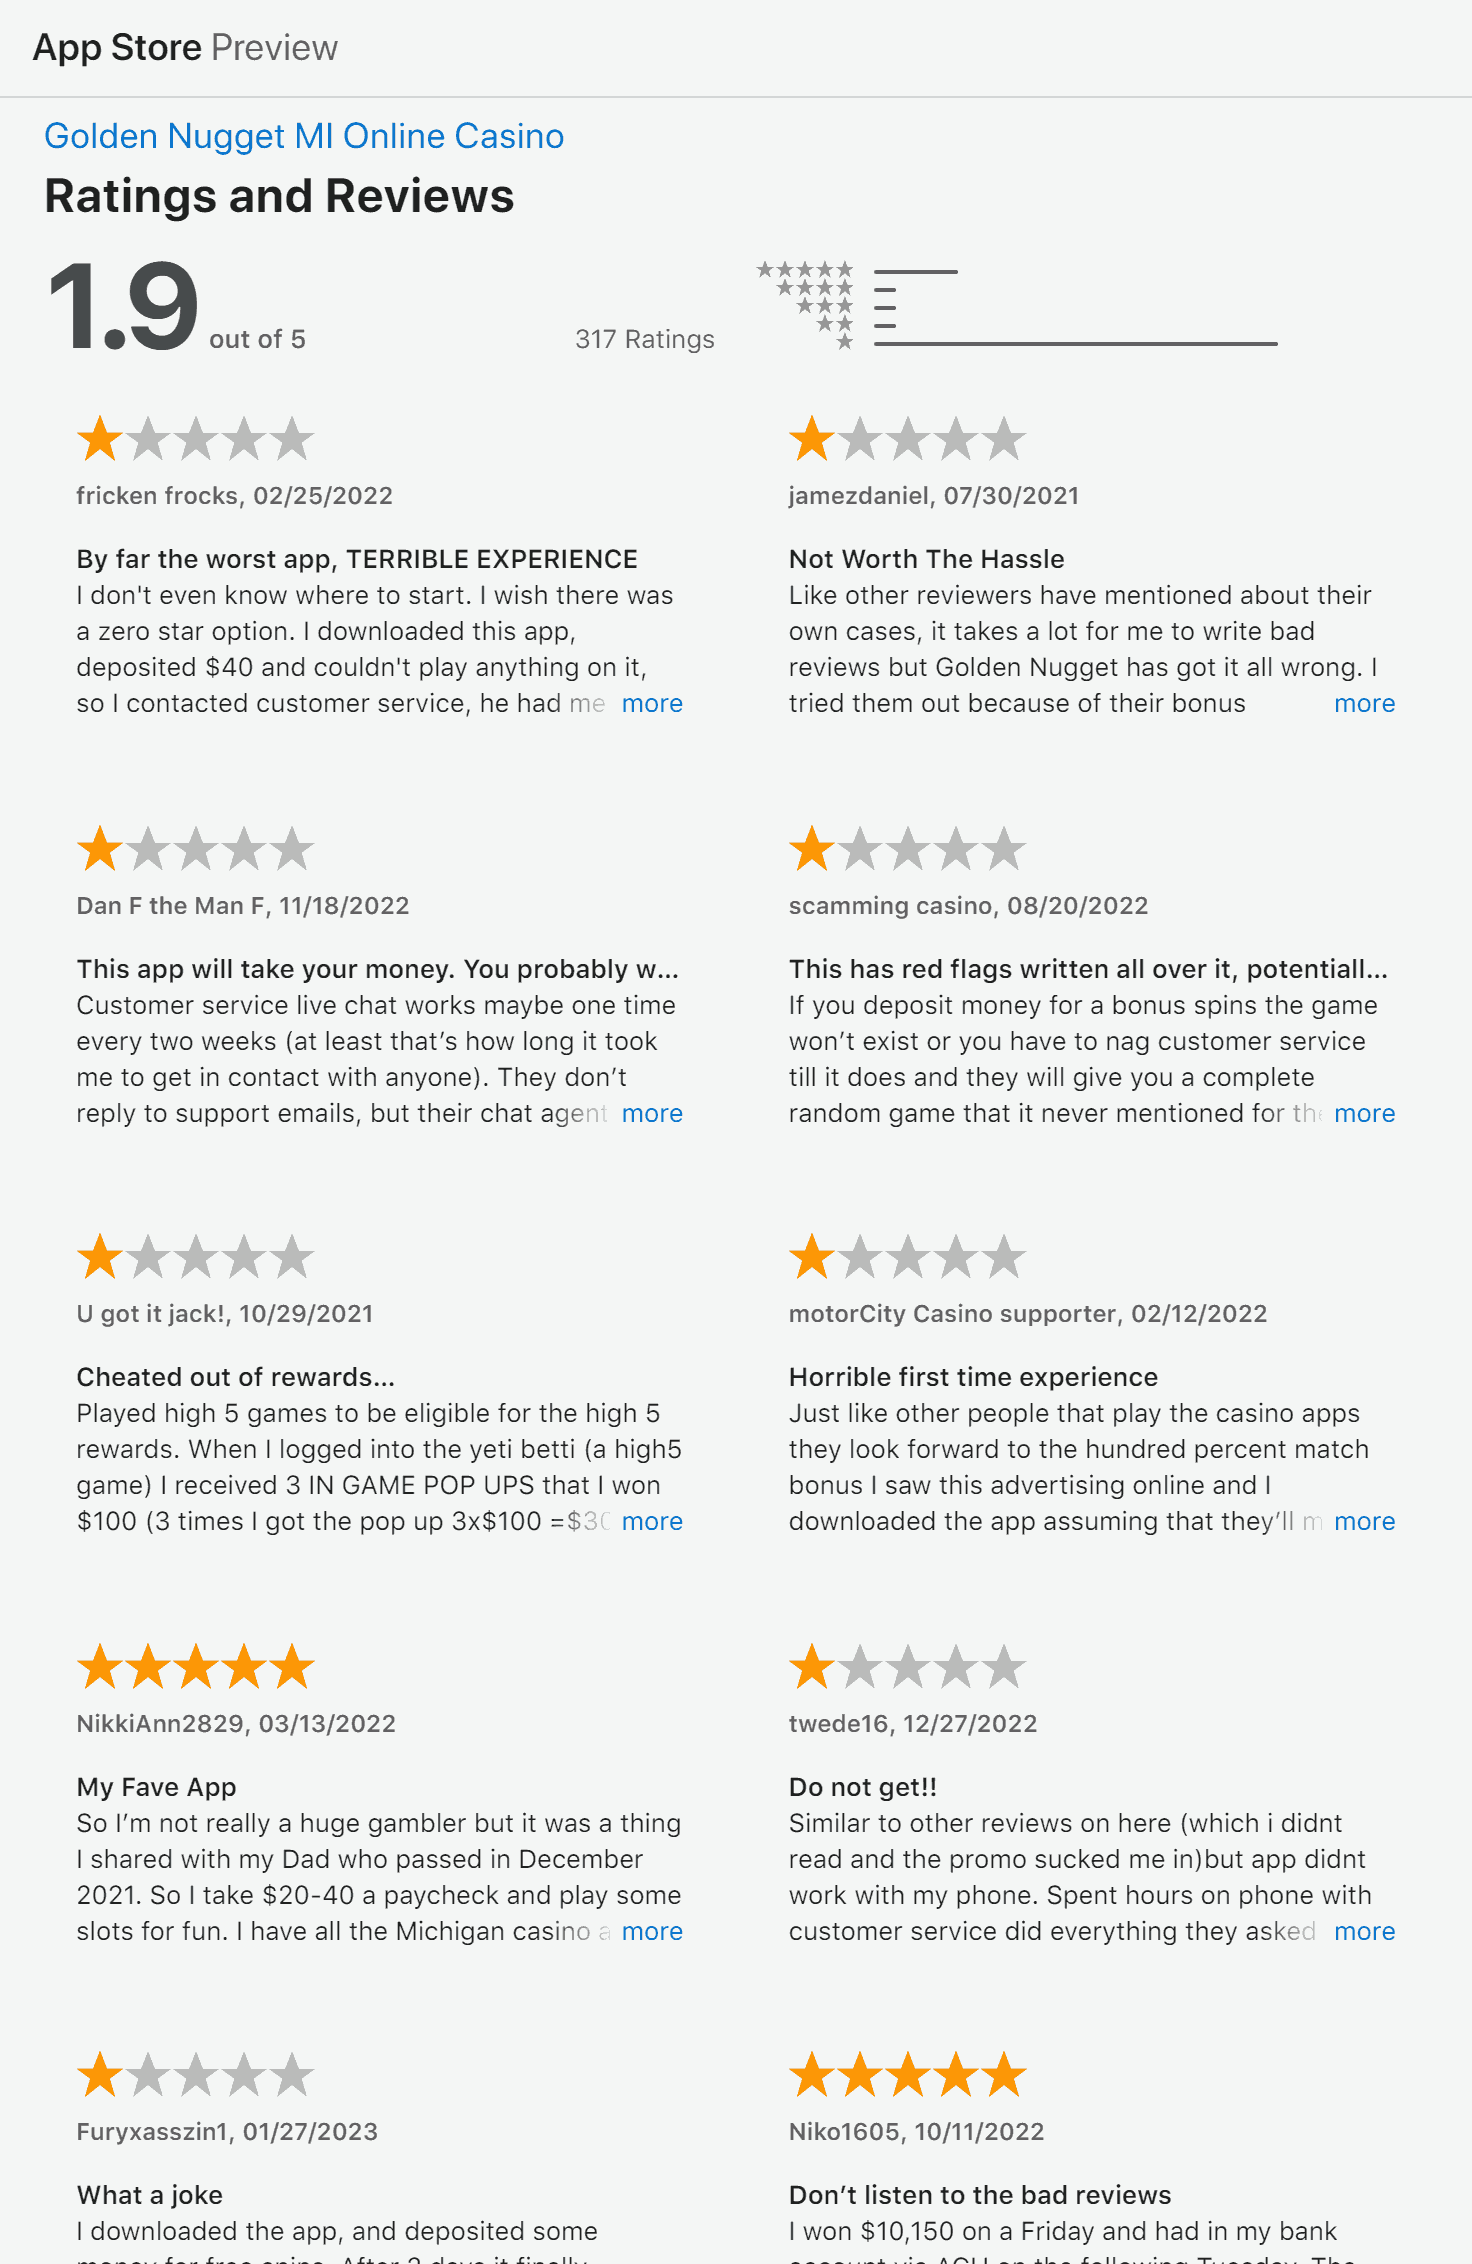 Apple App store ratings and reviews for the Golden Nugget MI